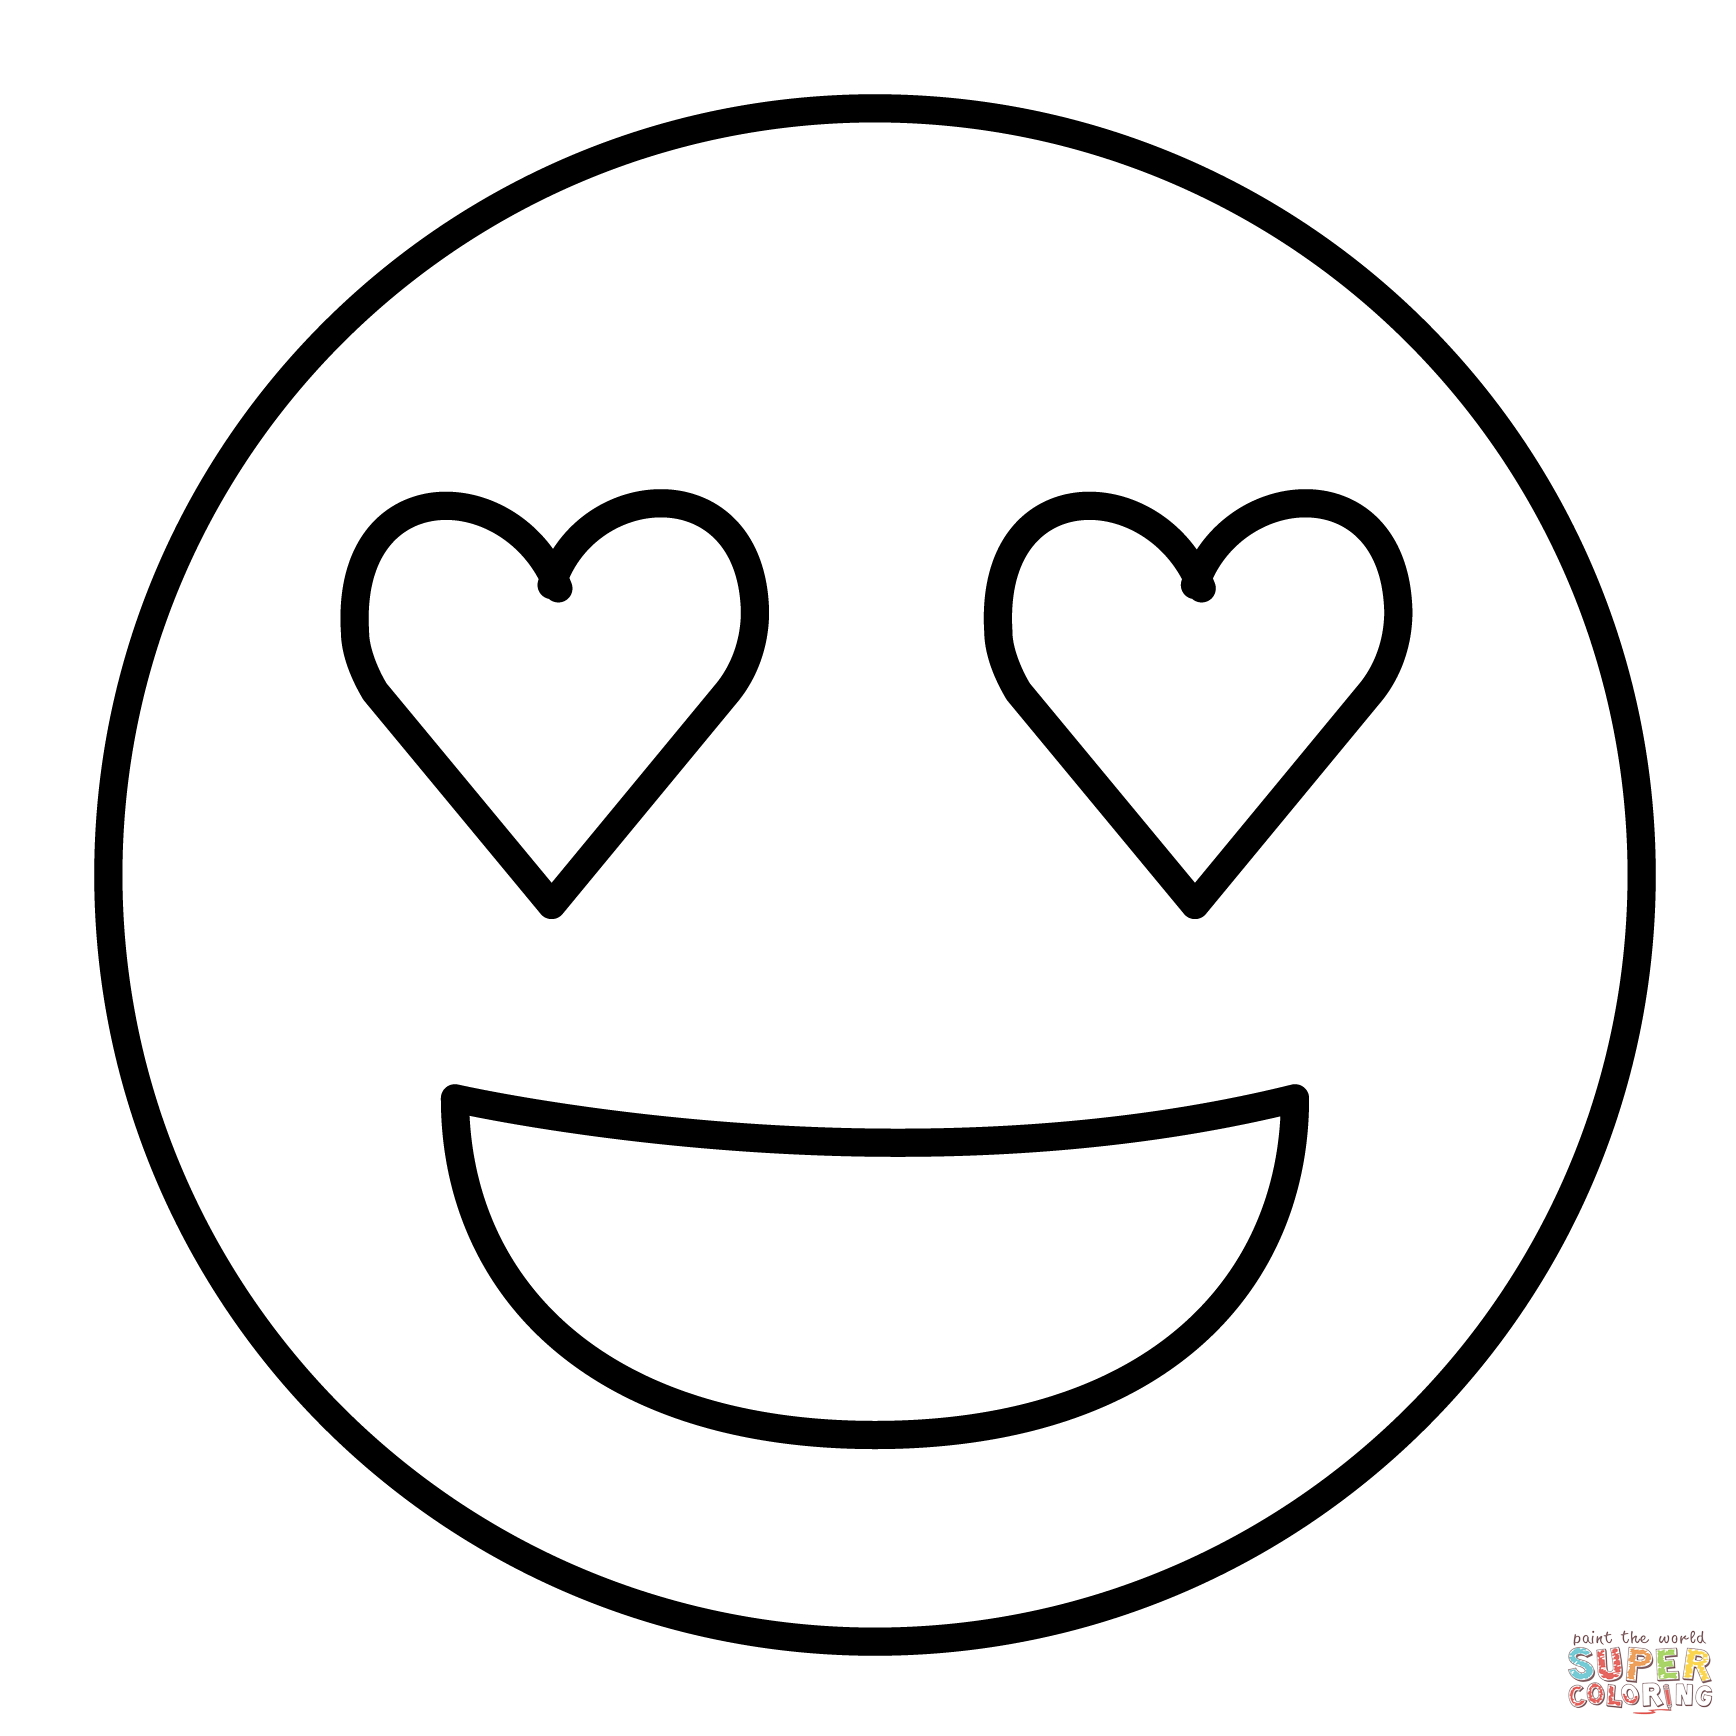 Smiling face with heart eyes emoji coloring page free printable coloring pages